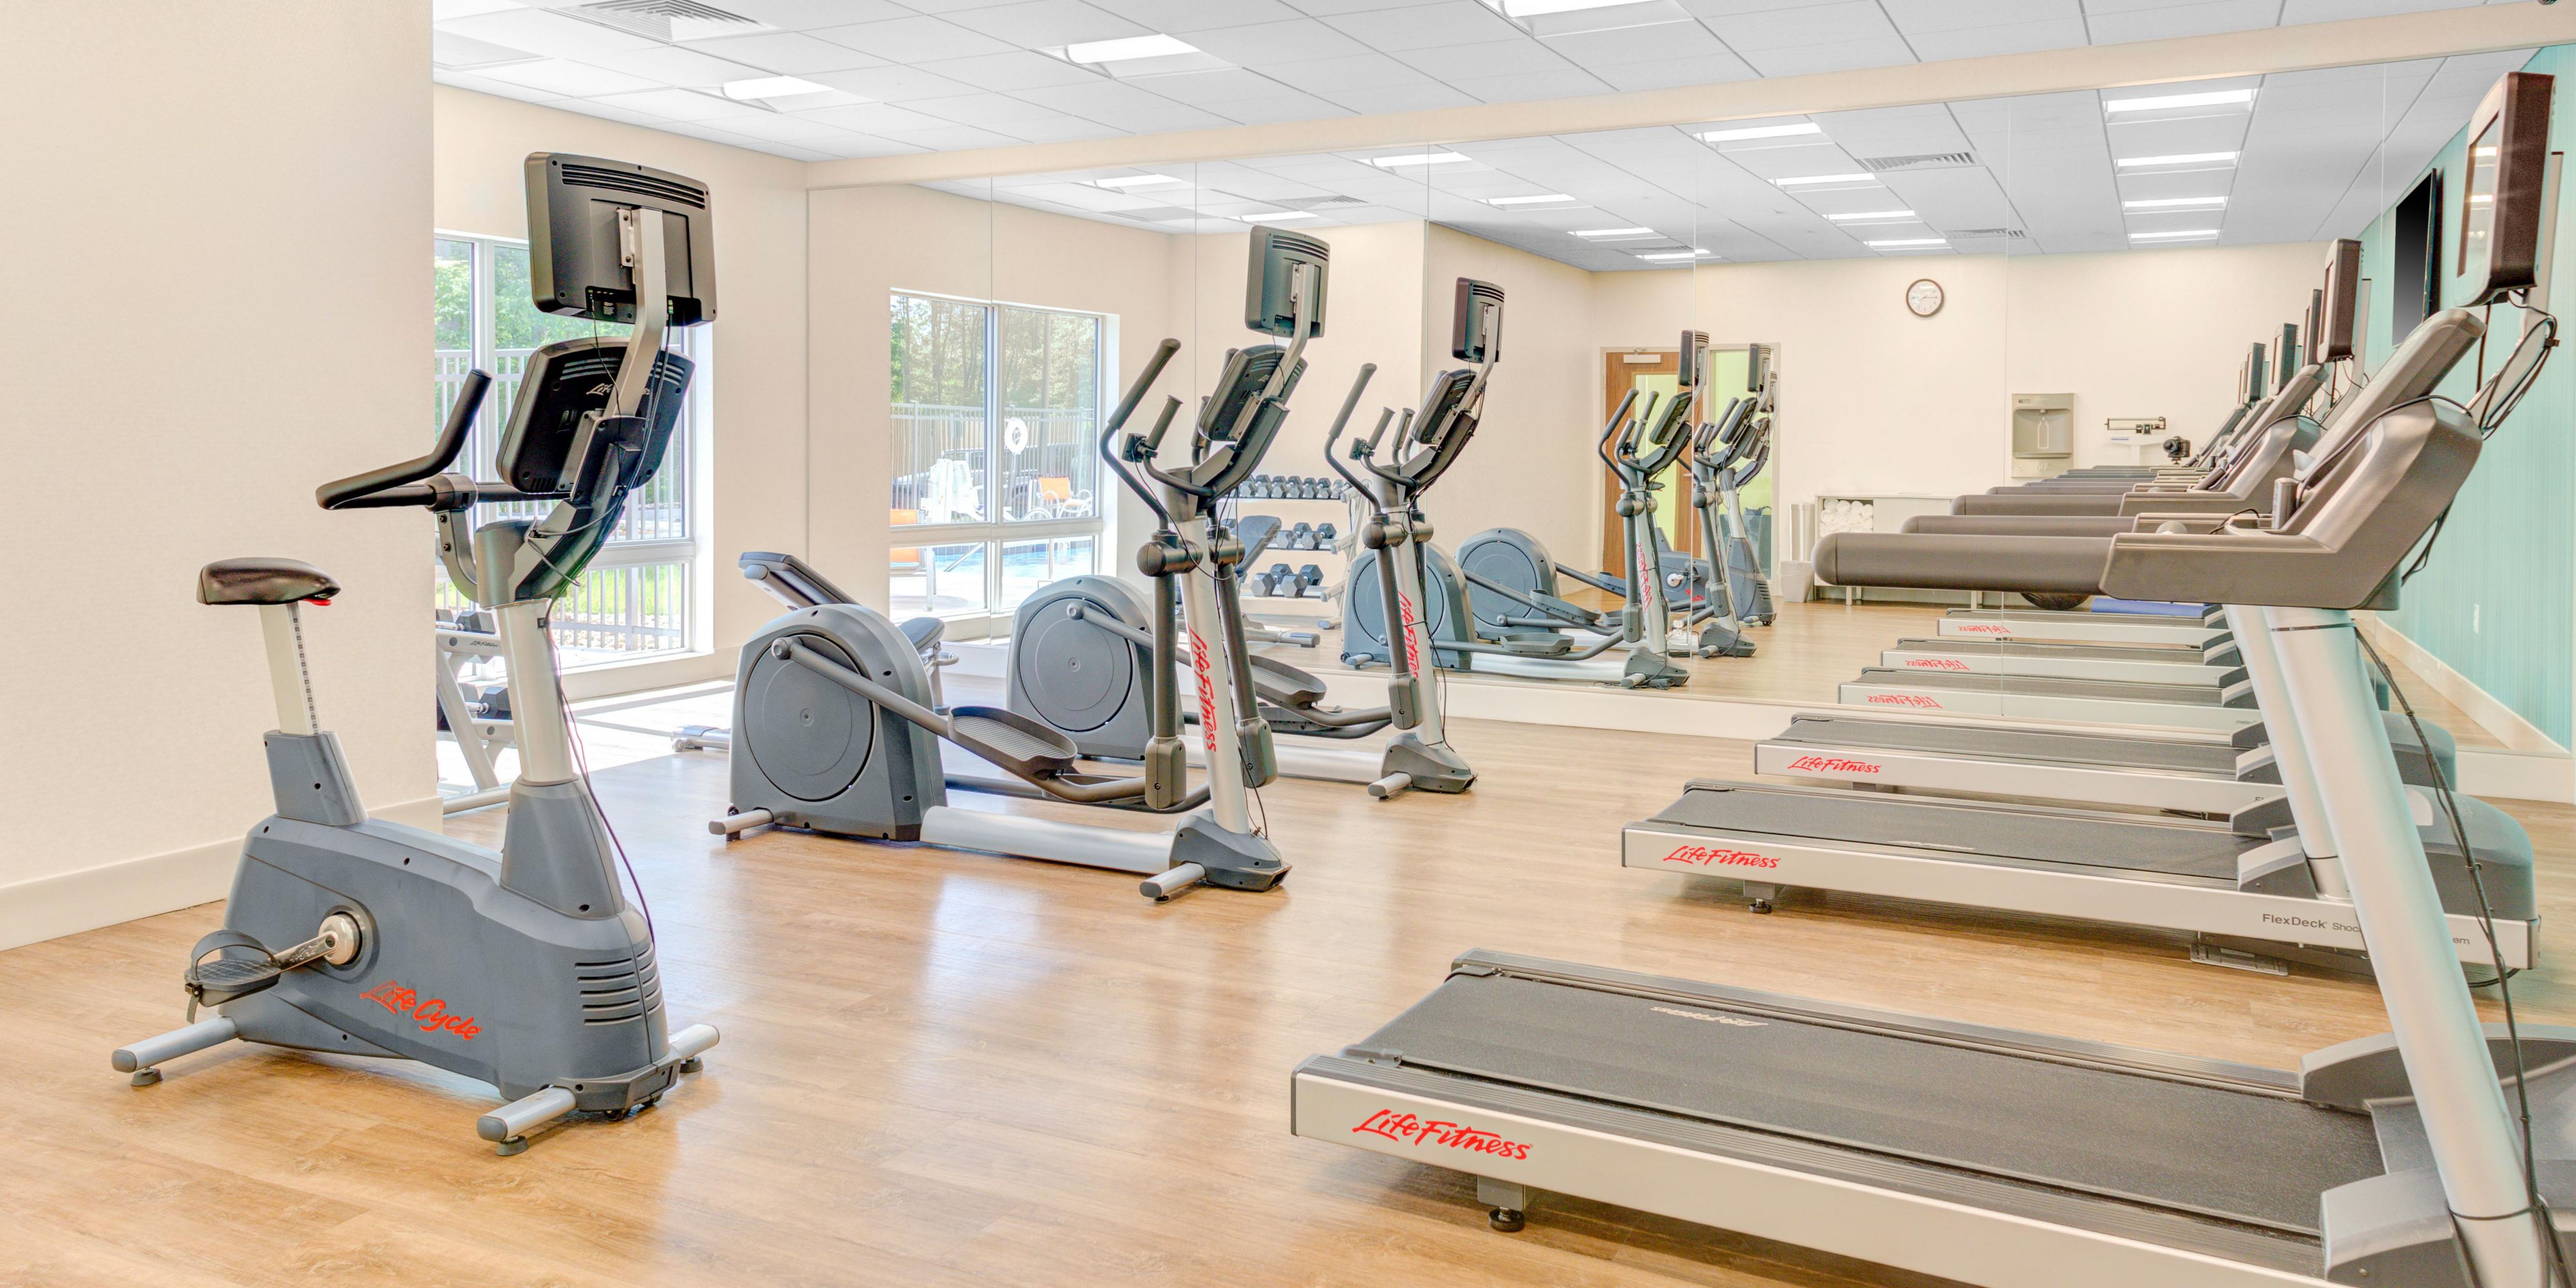 Stay on your workout routine while you stay with us at the Holiday Inn Express & Suites King George - Dahlgren!